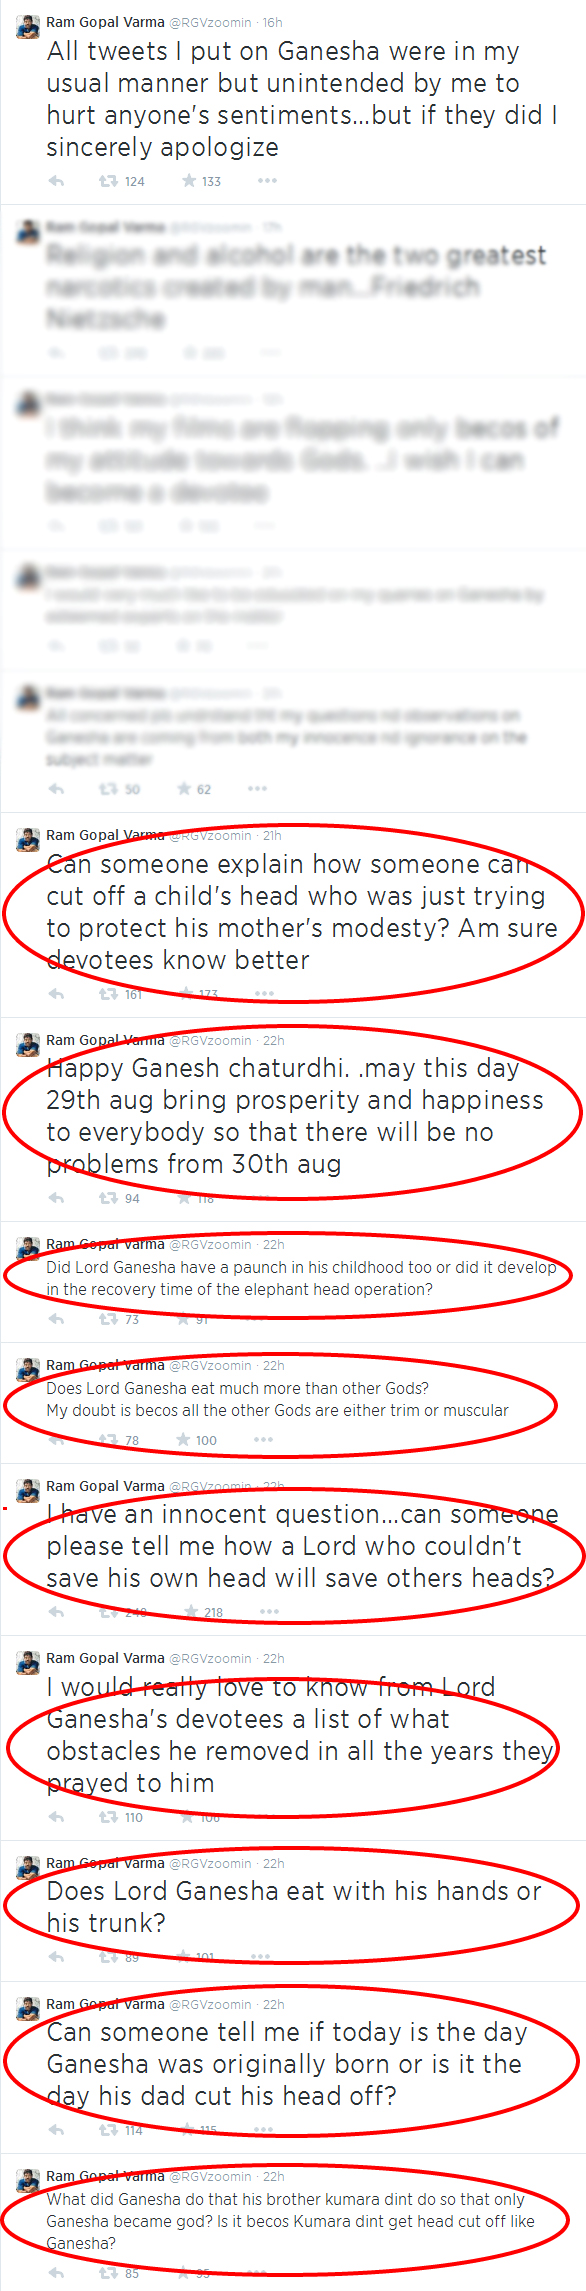 Controversial Questions of Ram Gopal Verma on Ganesha Chaturthi on 29 August 2014